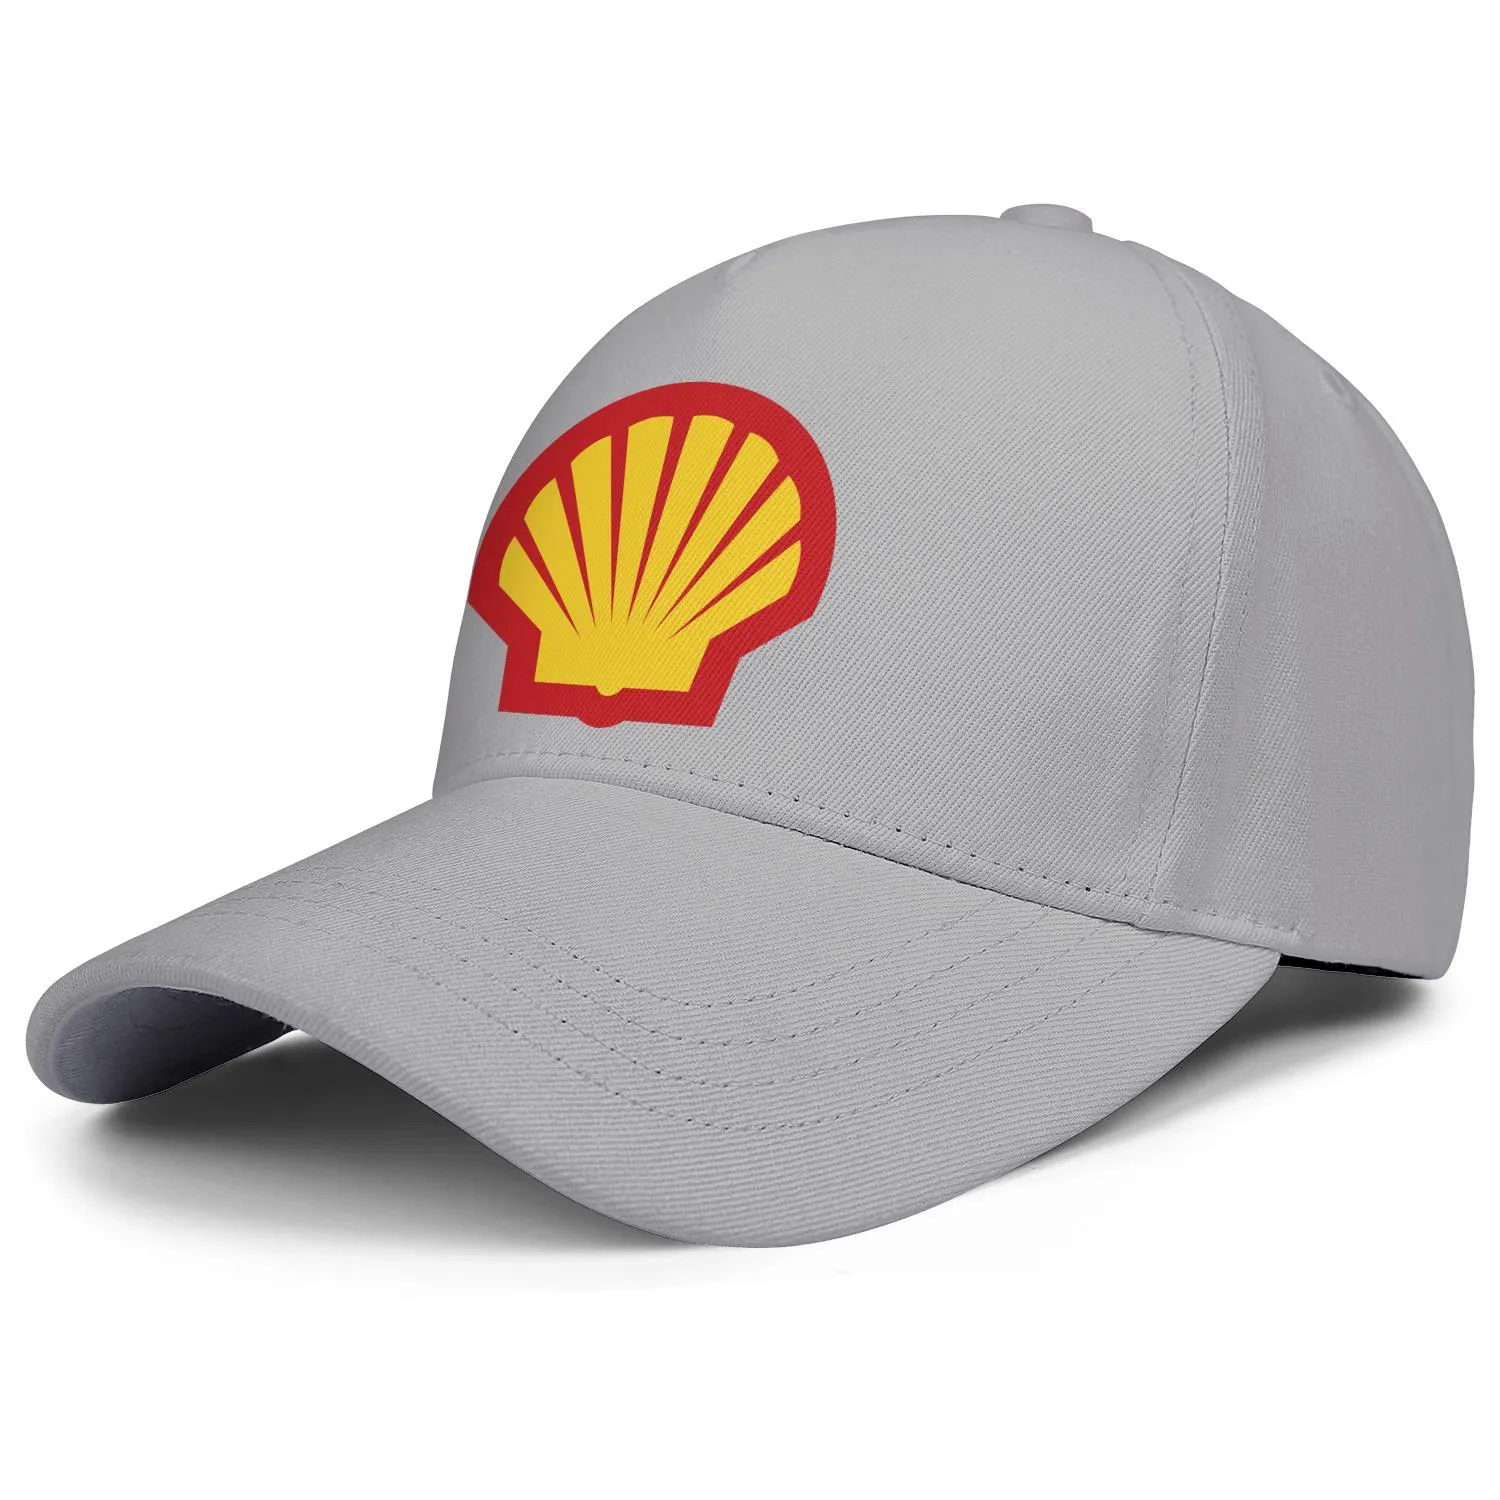 Shell gasoline gas station logo mens and women adjustable trucker cap fitted vintage cute baseballhats locator Gasoline symbo1556063